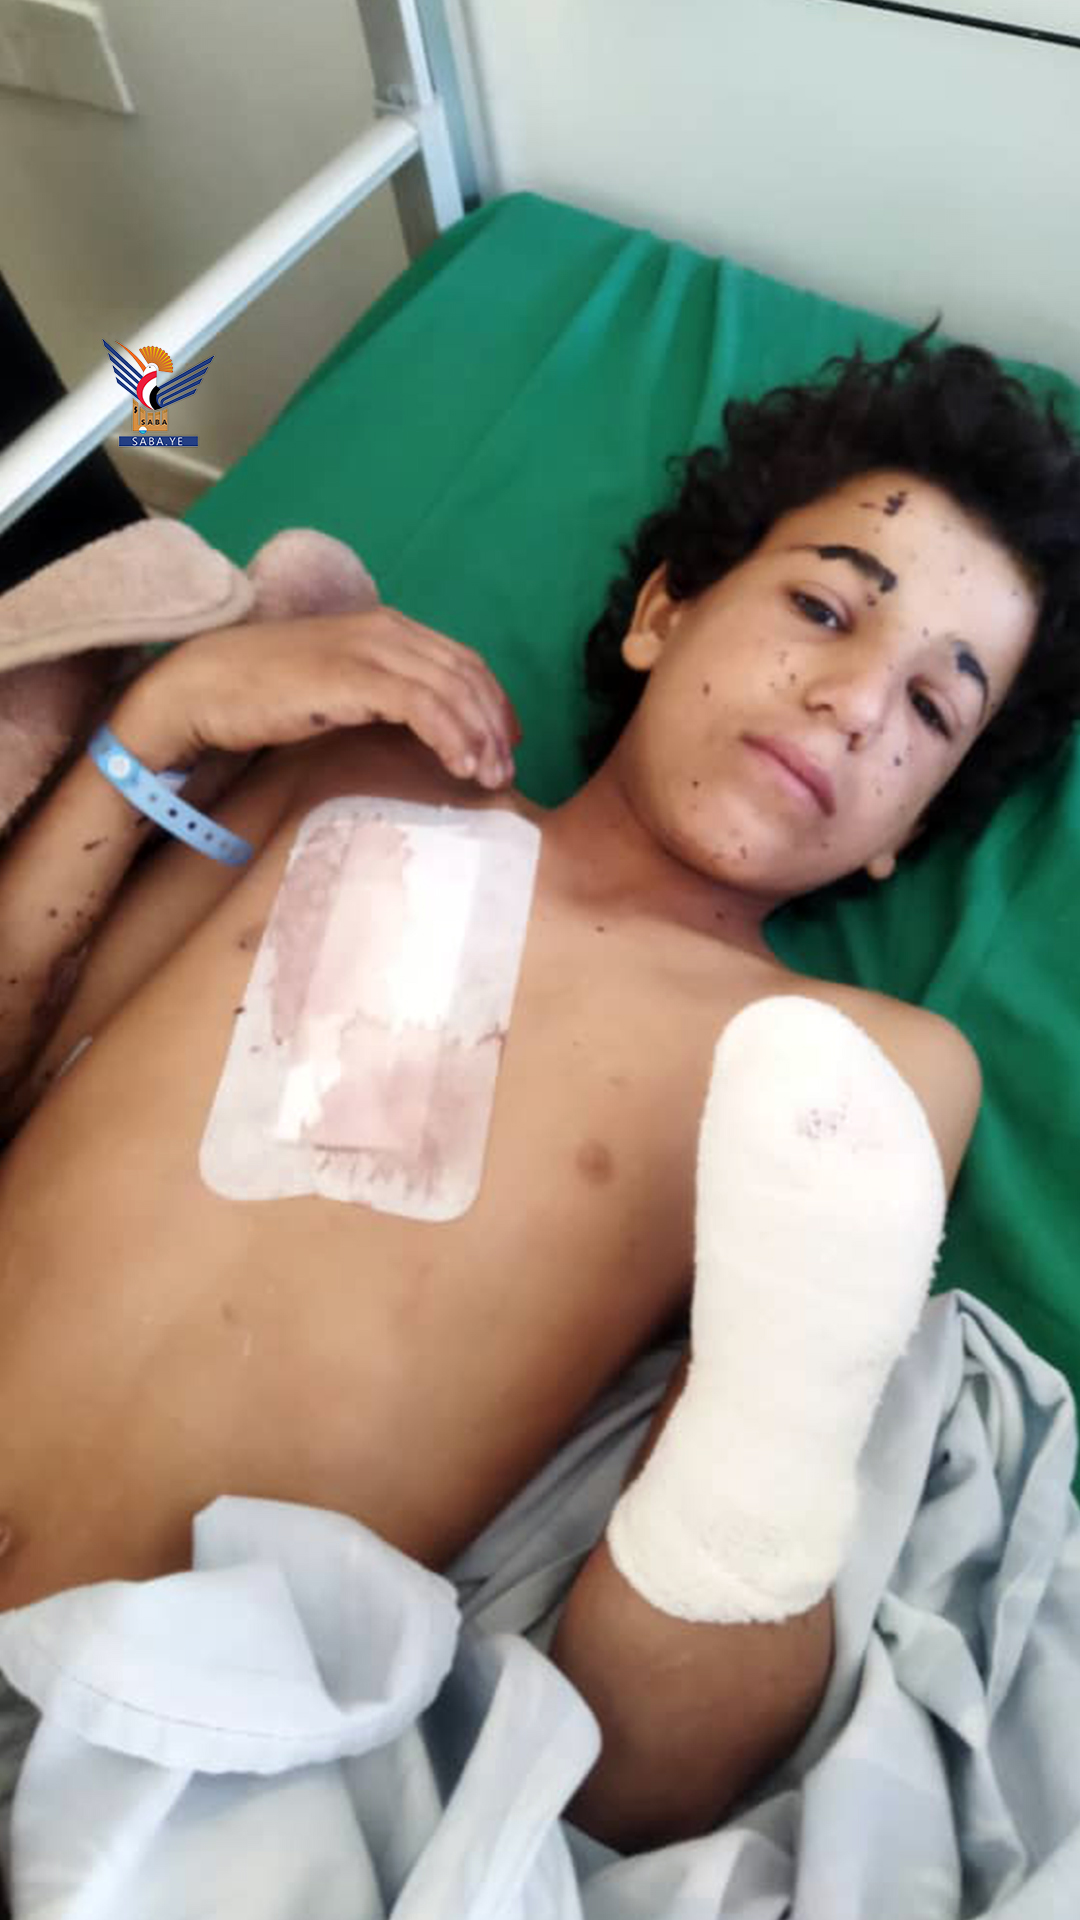 A child was injured by an aggression explosion remnant in Marib